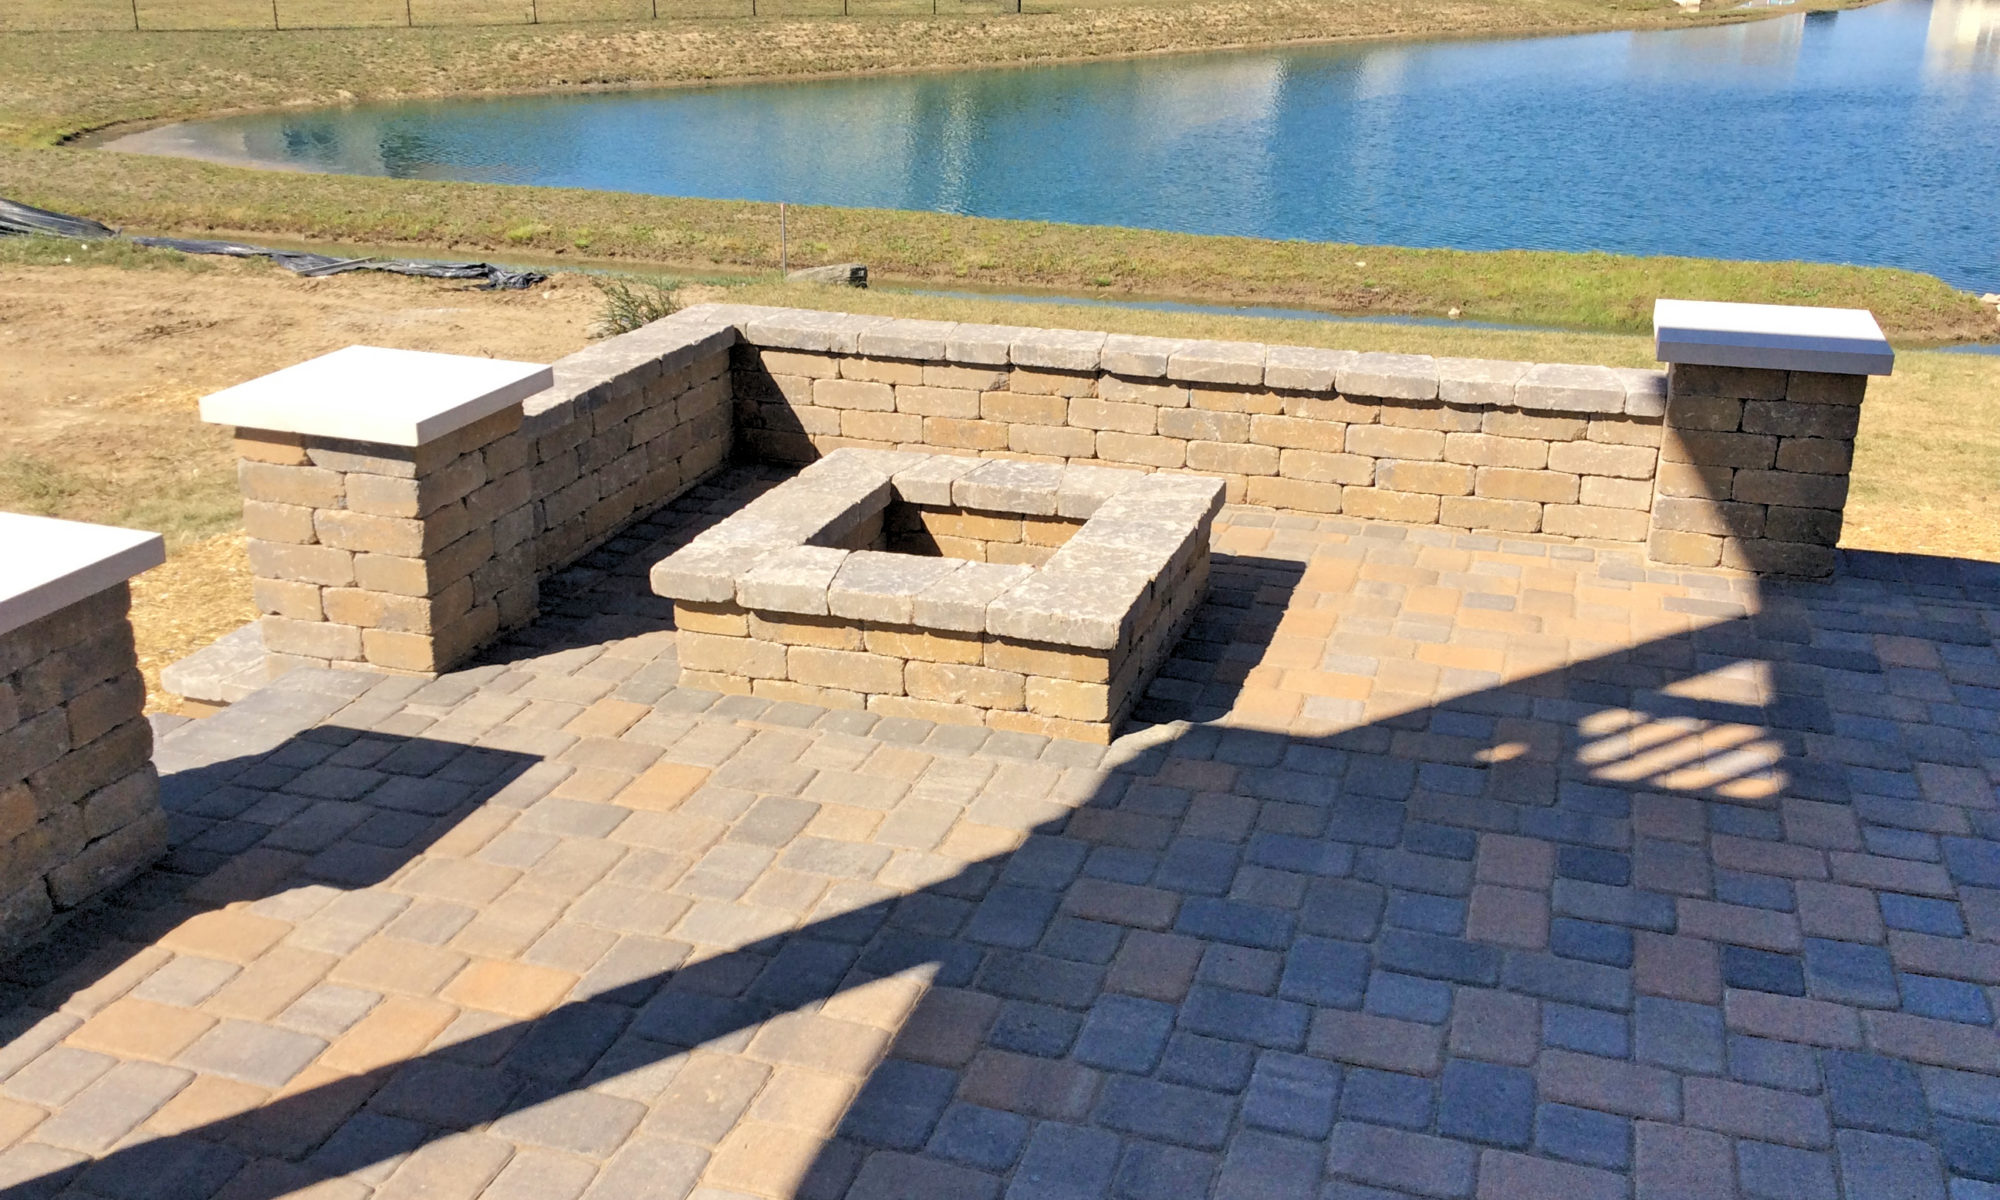 Precision Outdoors Urban Paver Patio belgard Cambridge cobble materials charcoal color accents retaining wall Weston wall materials universal caps indianapolis, IN